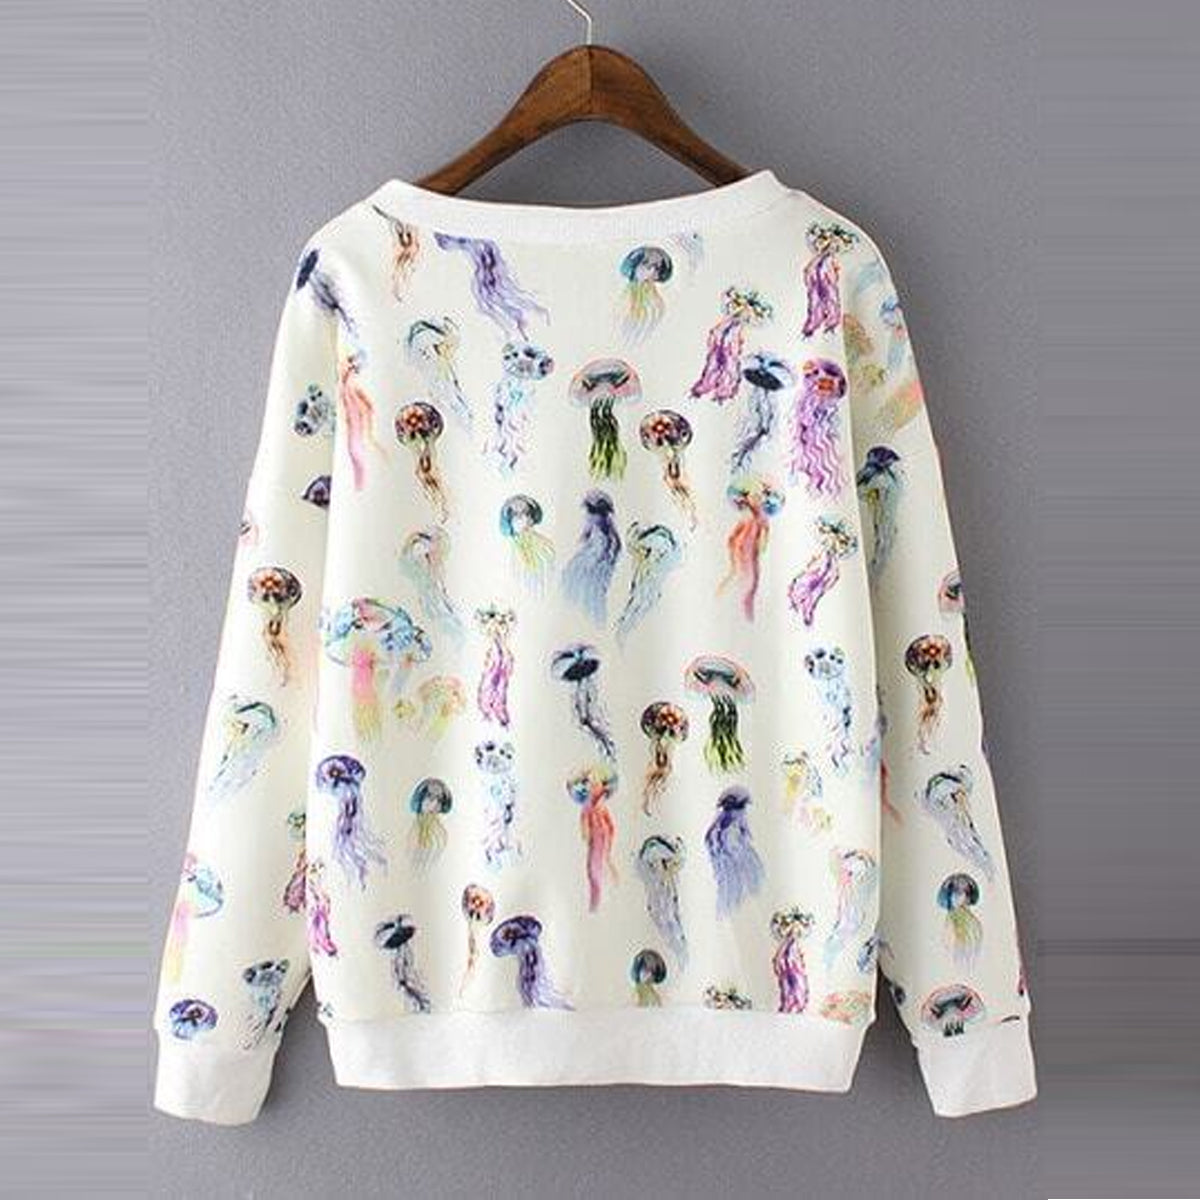 Multicolor Round Neck JellyFish Print Full Sleeves T Shirt